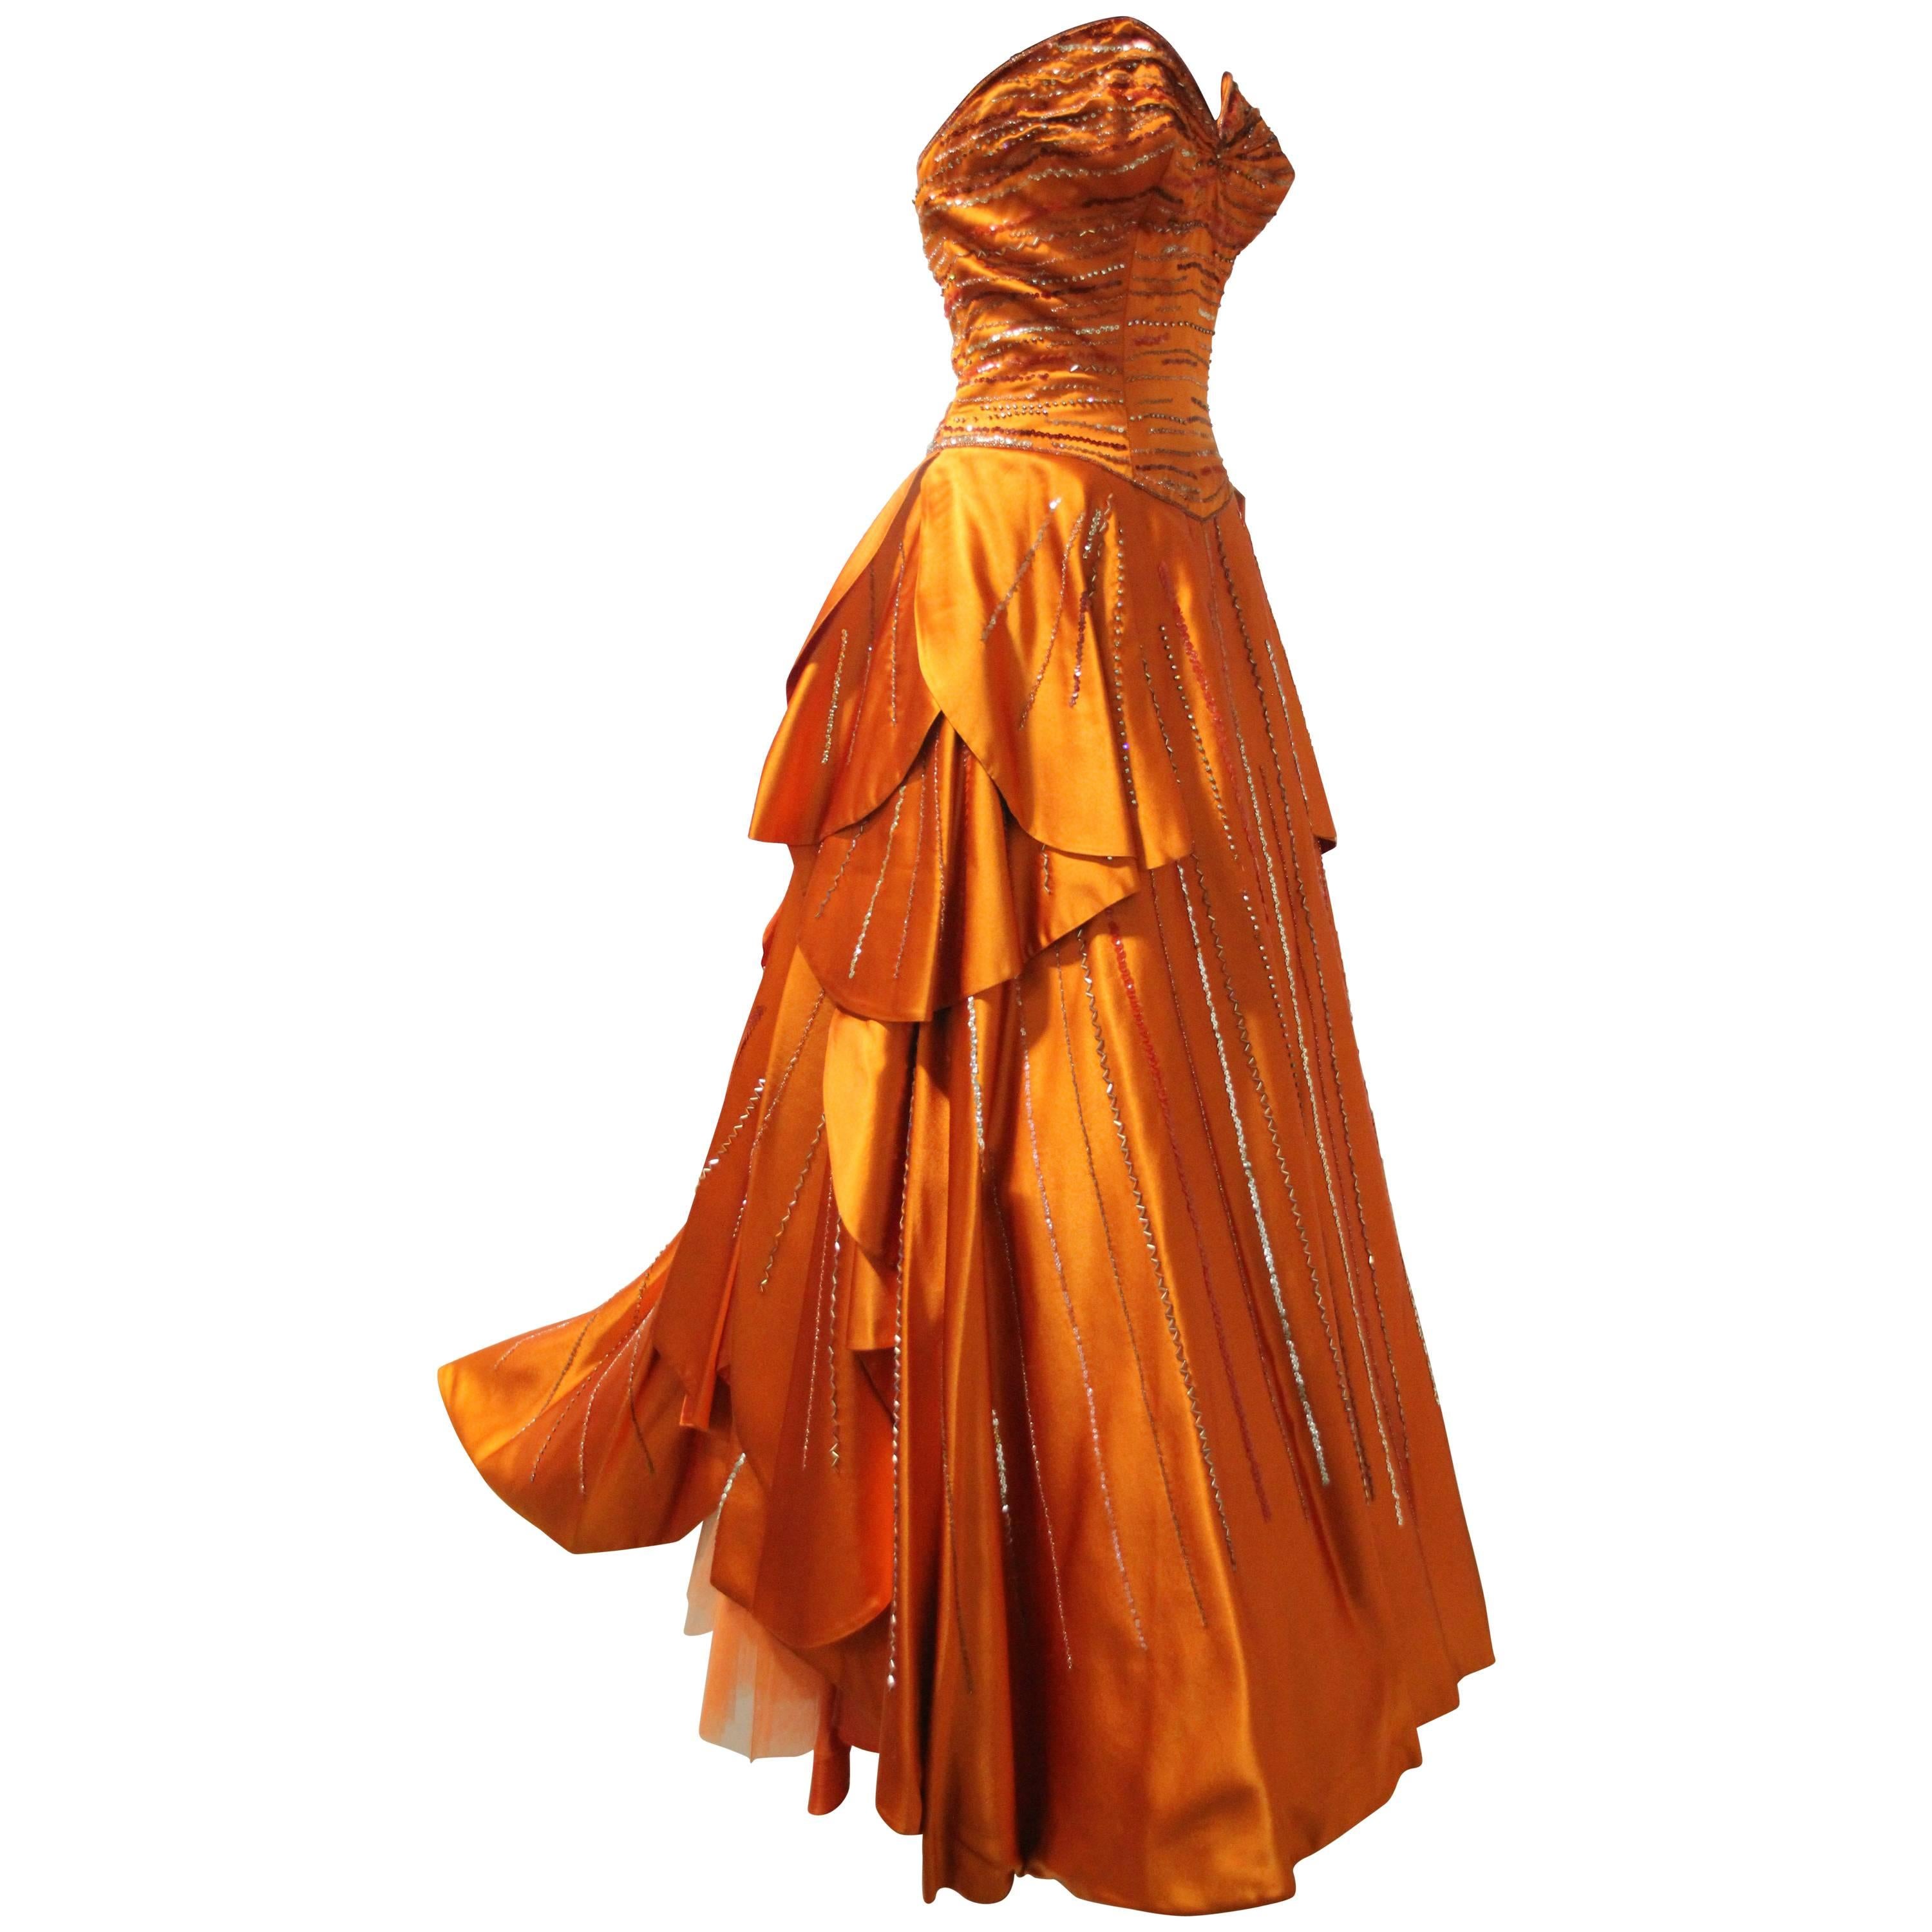 1950s MGM Mme. Etoile by Irene Sharaff Couture Ball Gown in Deep Persimmon Silk